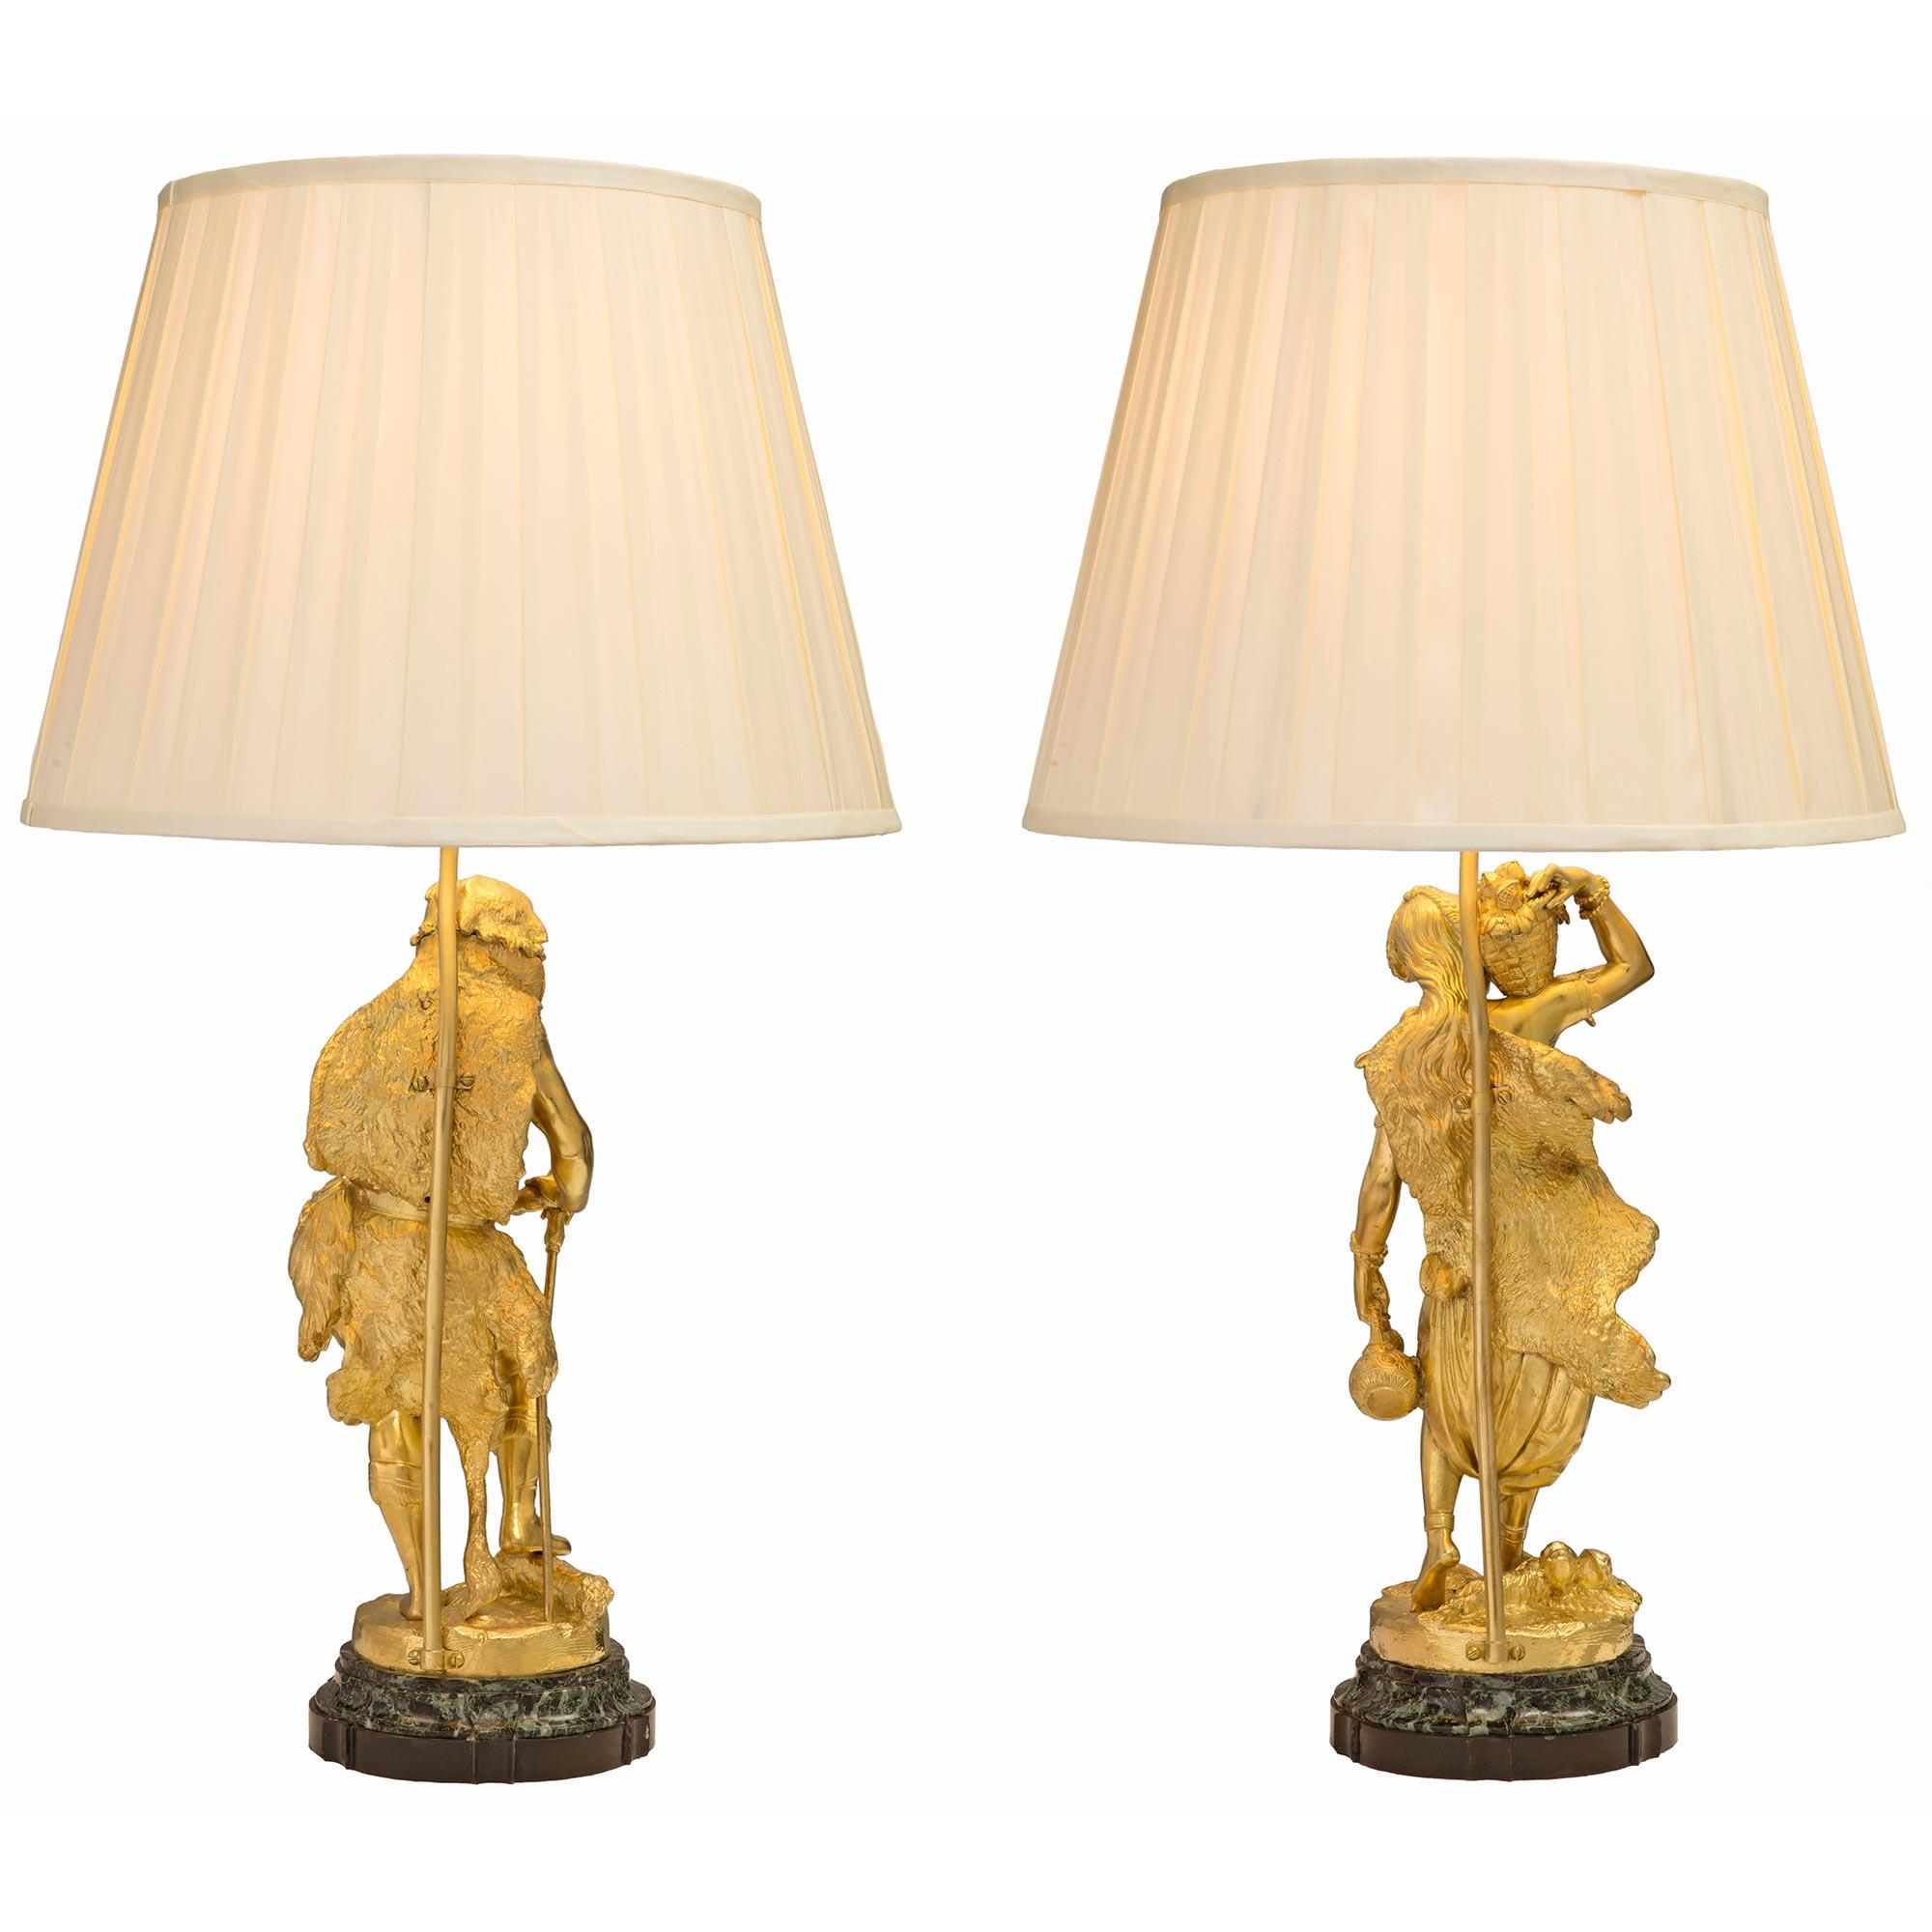 Pair of French 19th Century Belle Époque Period Statues Mounted into Lamps In Good Condition For Sale In West Palm Beach, FL